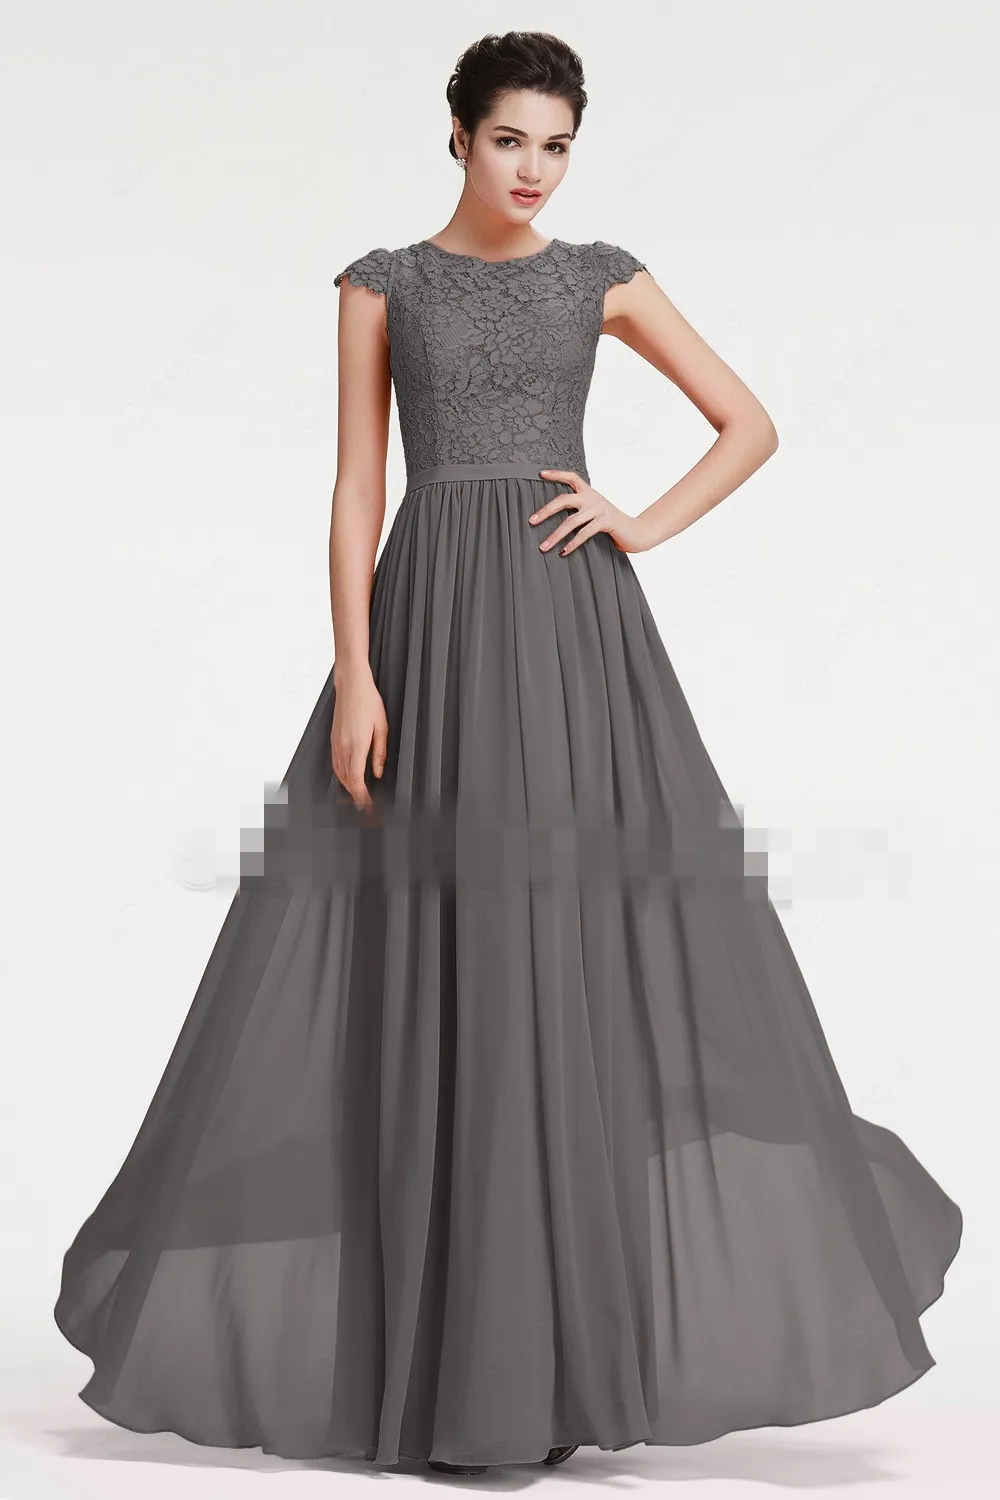 Beach Long Modest Bridesmaid Dresses With Cap Sleeves Grey Lace Chiffon Country Summer Wedding Party Gowns Maids of Honor Dress 2019